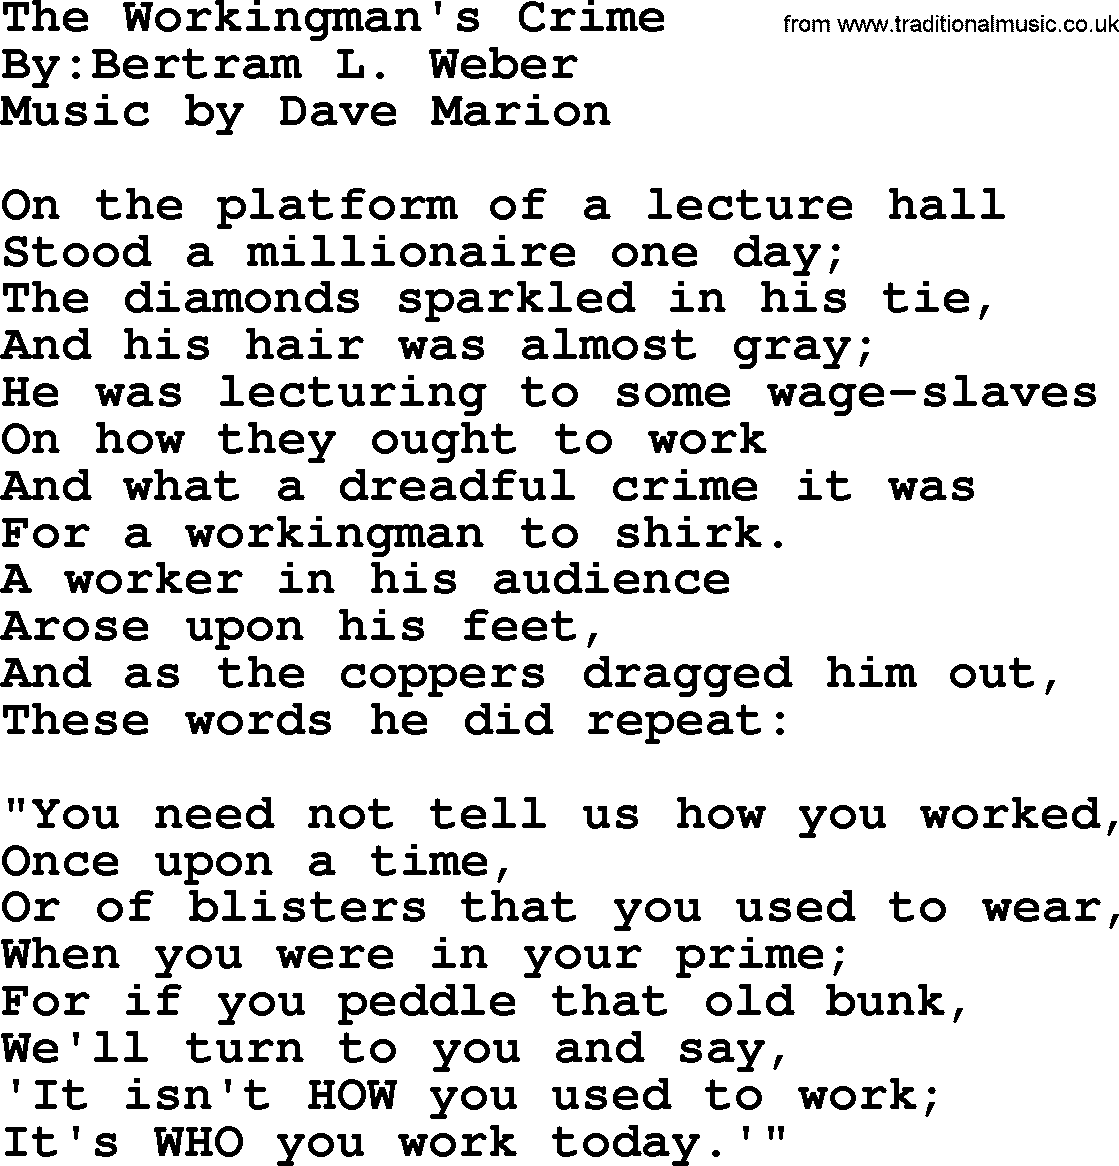 Political, Solidarity, Workers or Union song: The Workingmans Crime, lyrics